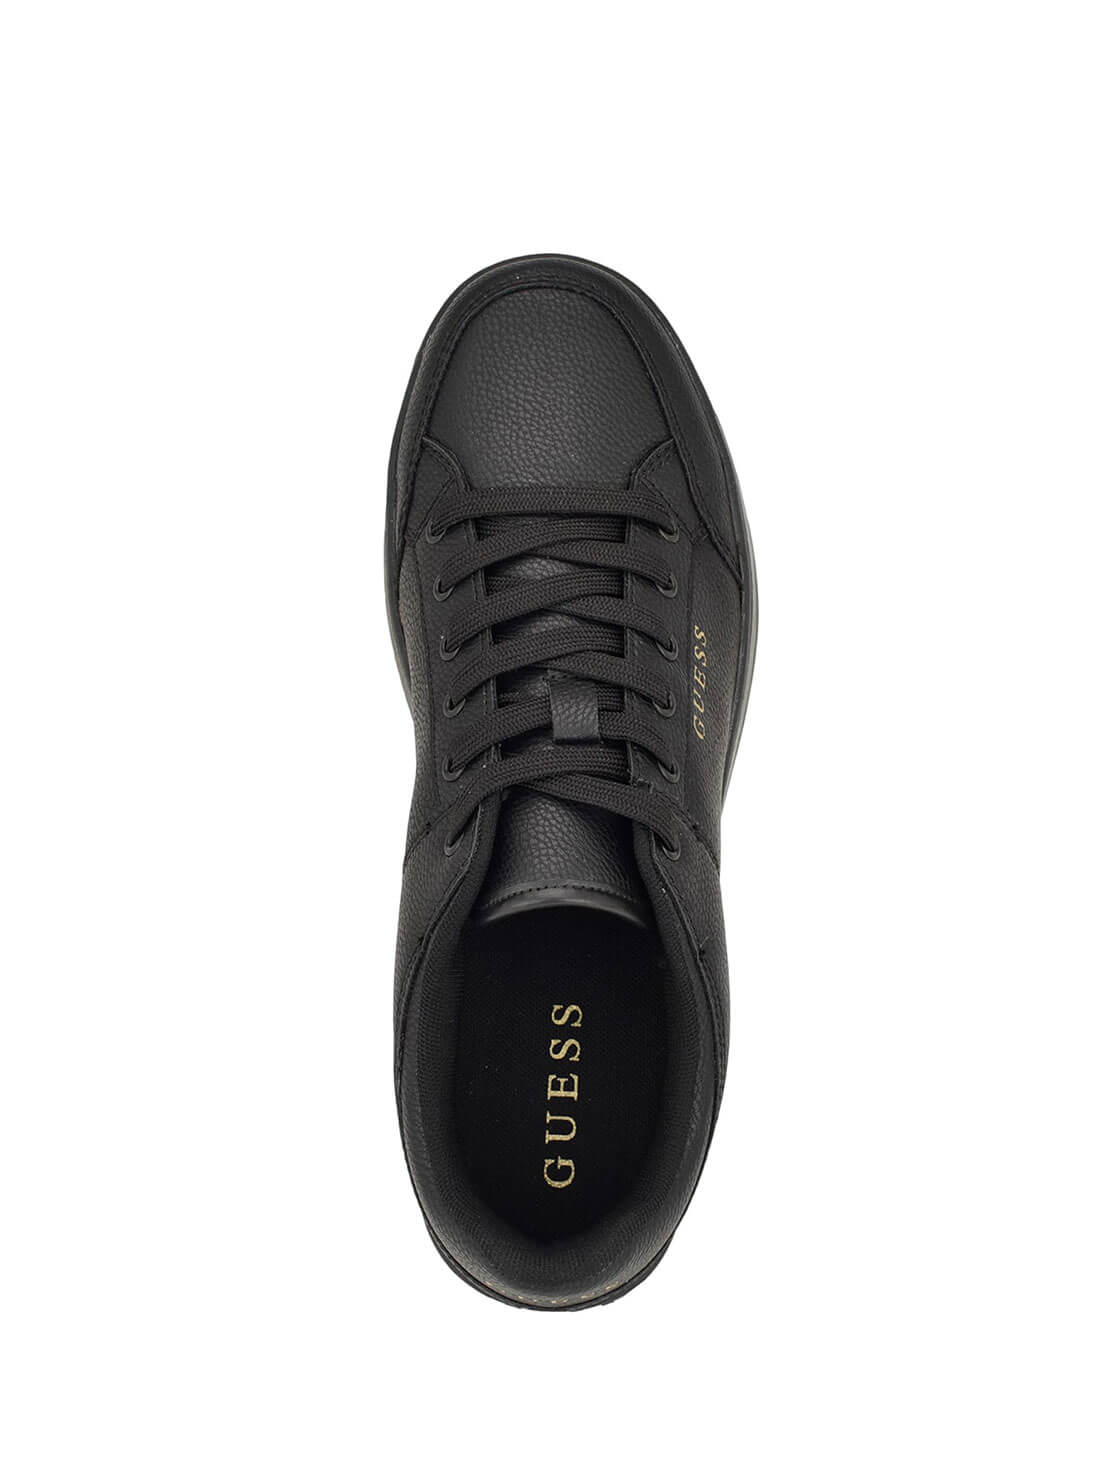 Black Tempo Sneakers | GUESS men's shoes | top view